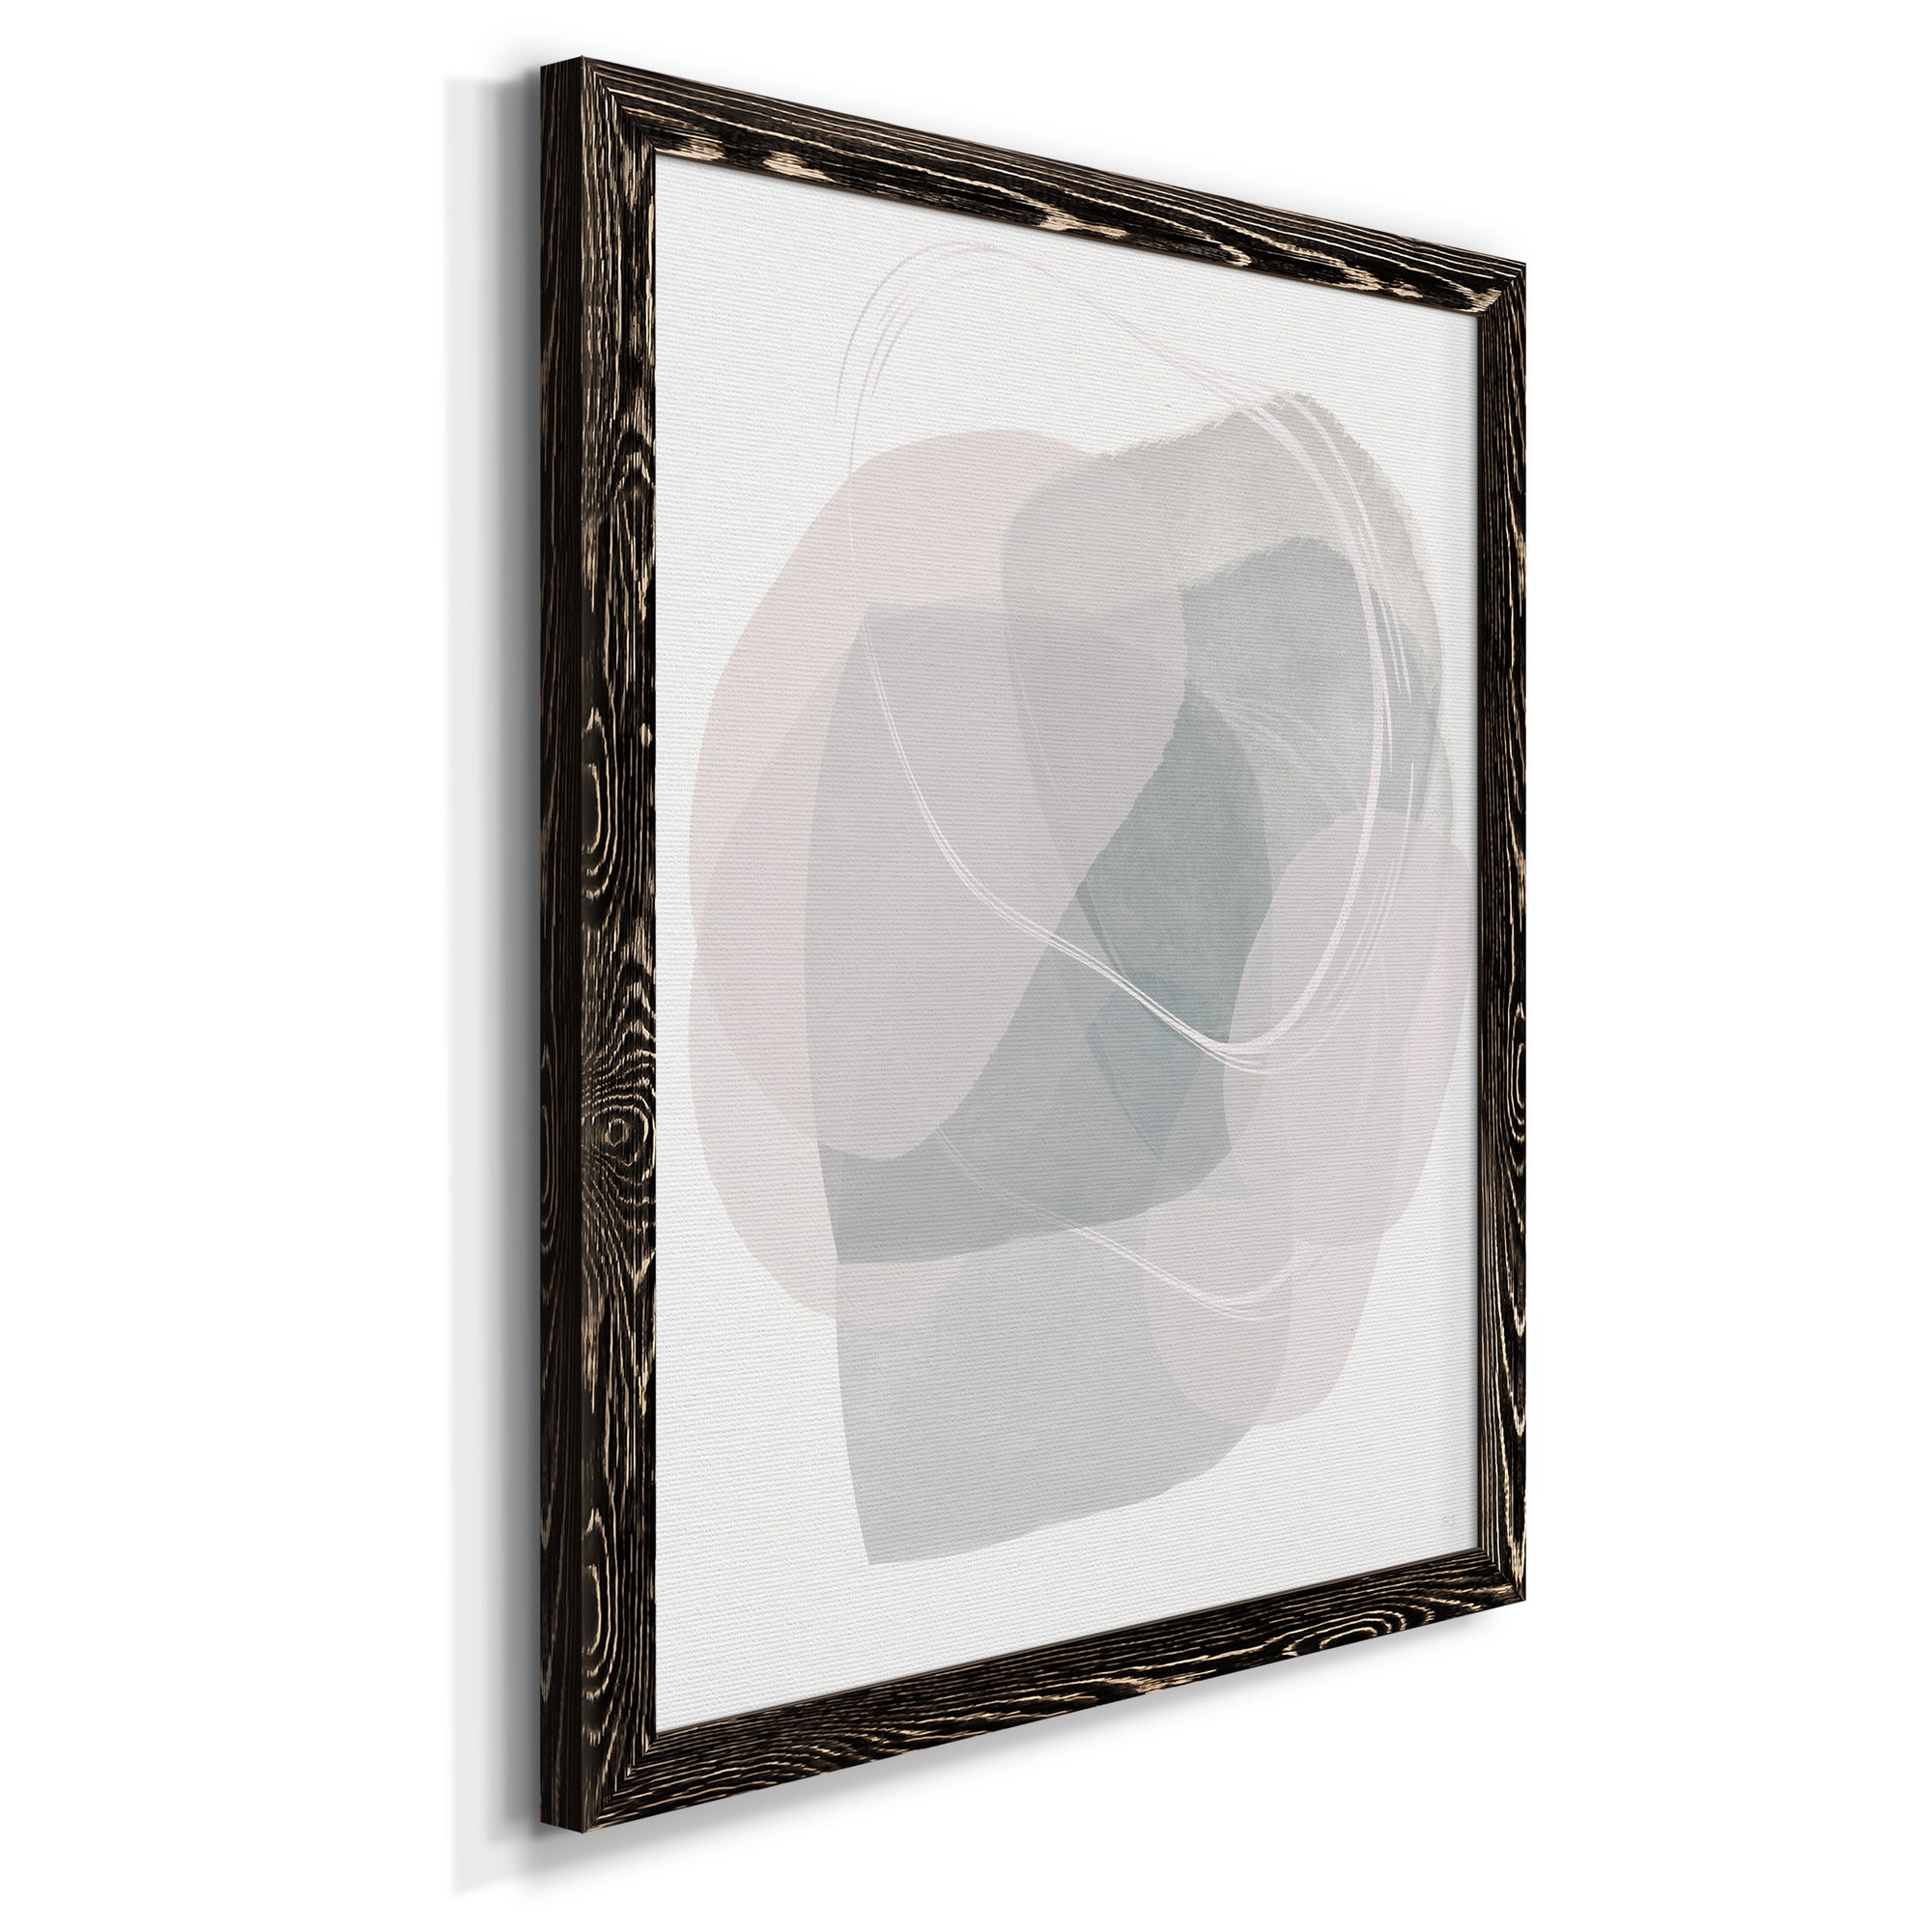 River Jewels I - Premium Canvas Framed in Barnwood - Ready to Hang